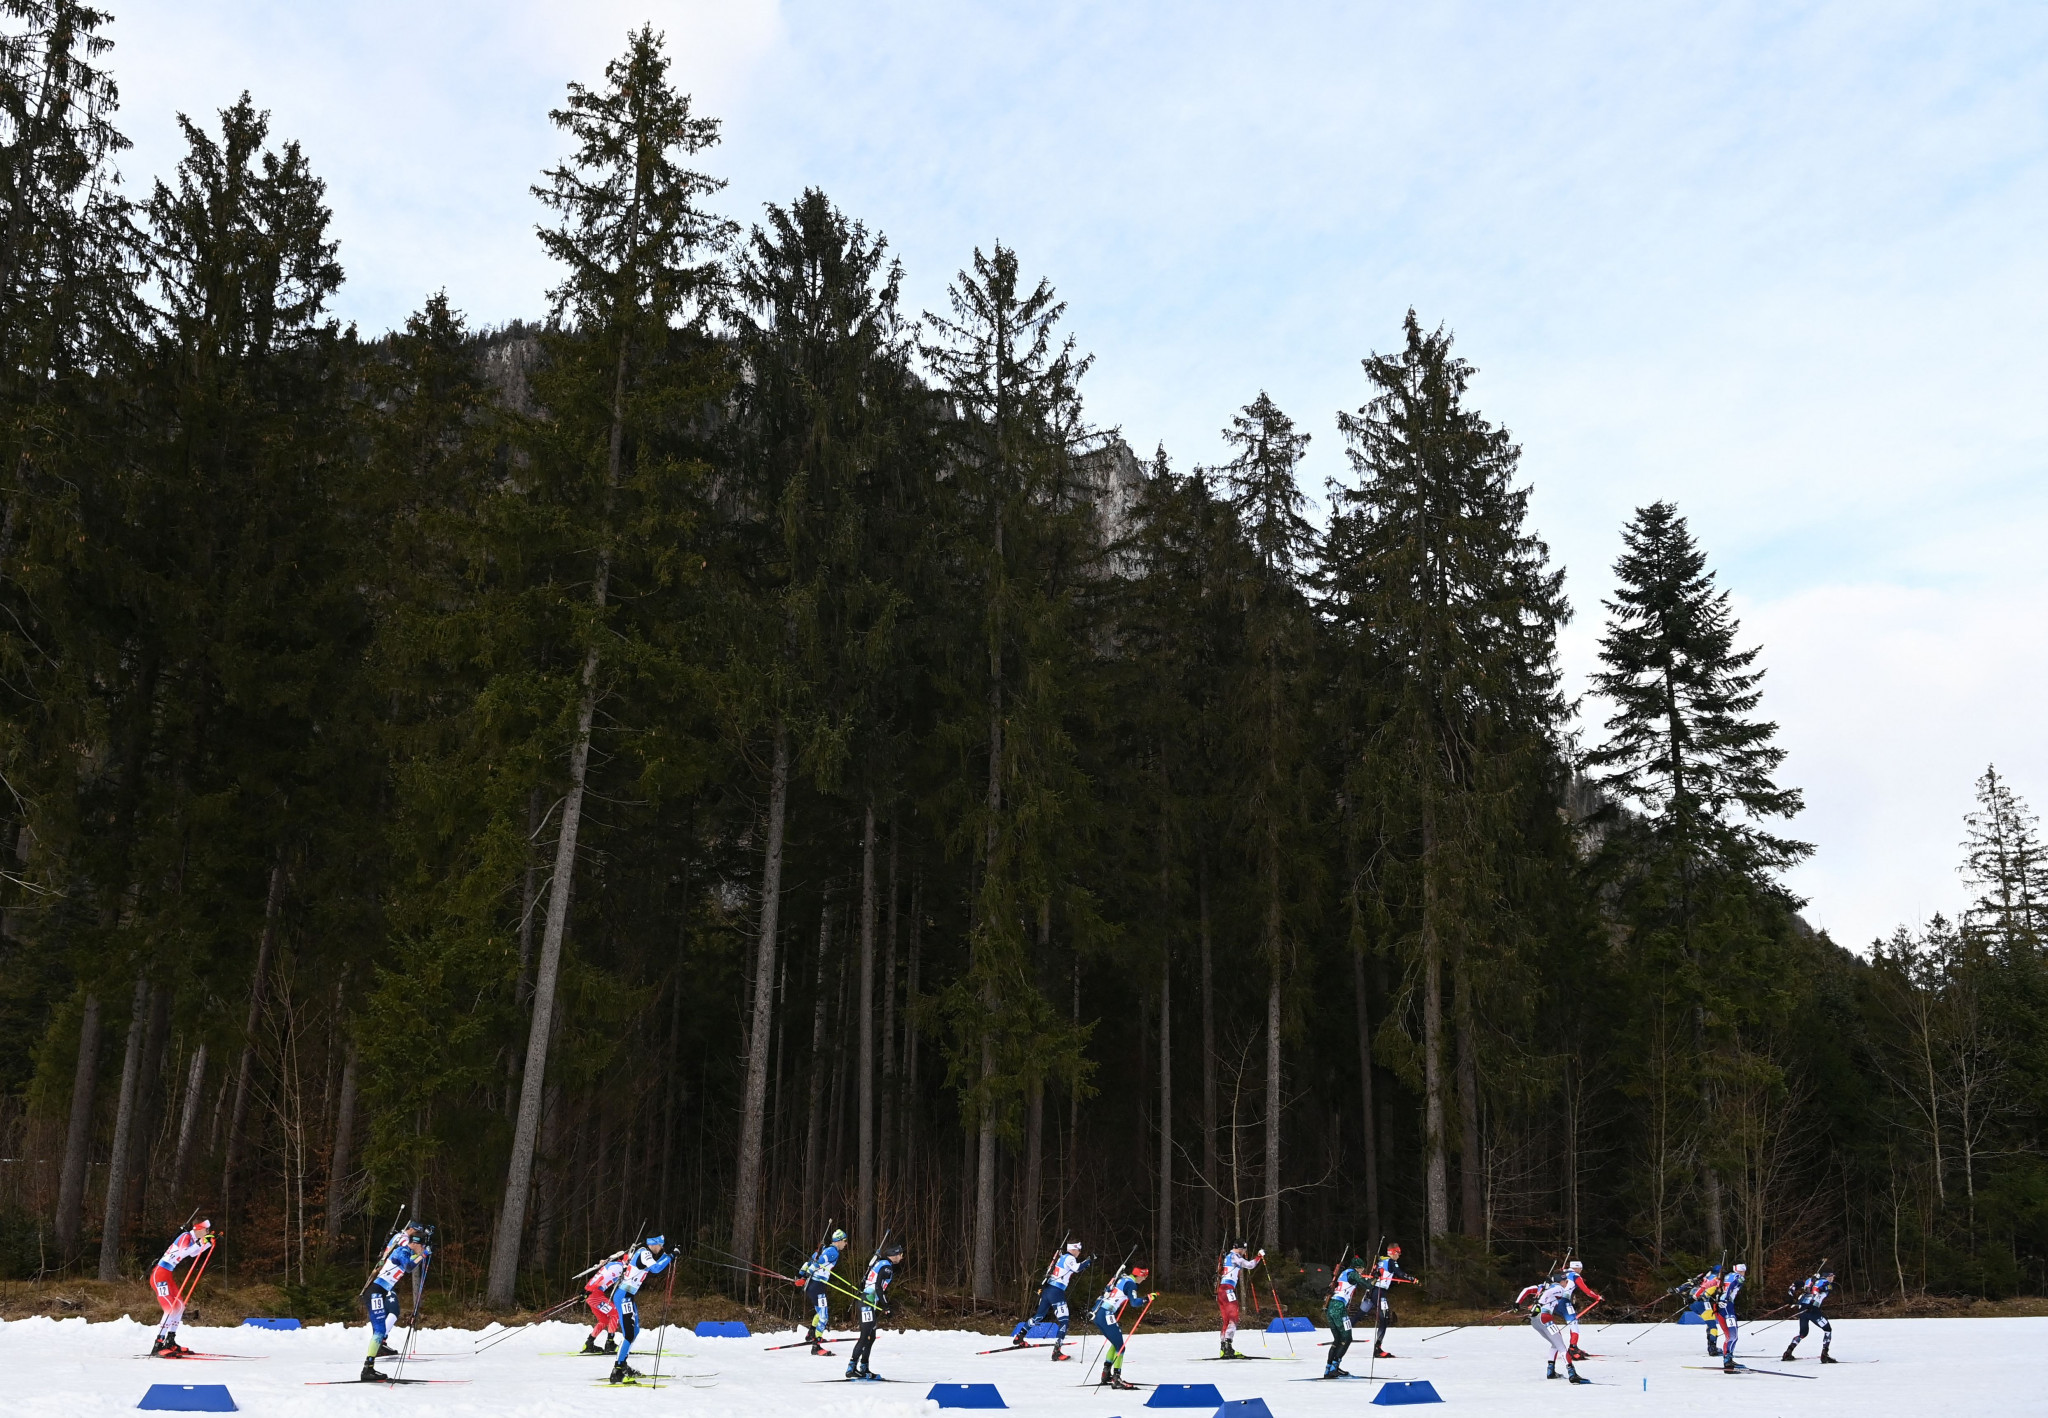 Norway fell as low as 16th at the end of the first leg of the 4x.7.5km relay after  lead-off Sturla Holm Laegreid received a standing penalty ©Getty Images